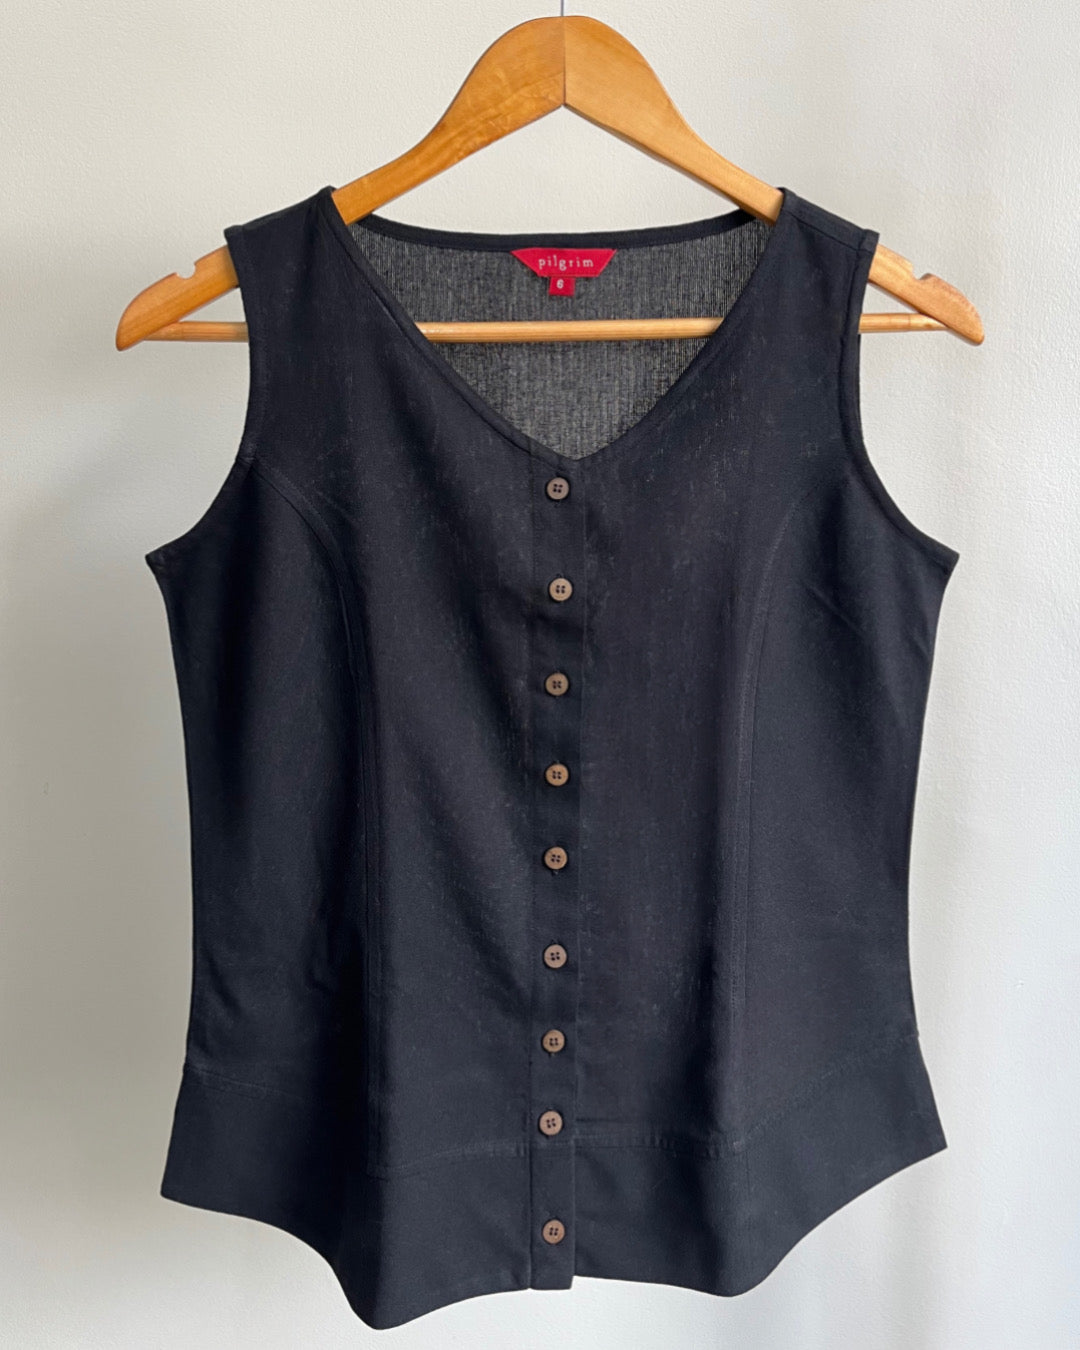 Butterfly Jacket Top - Black Cotton